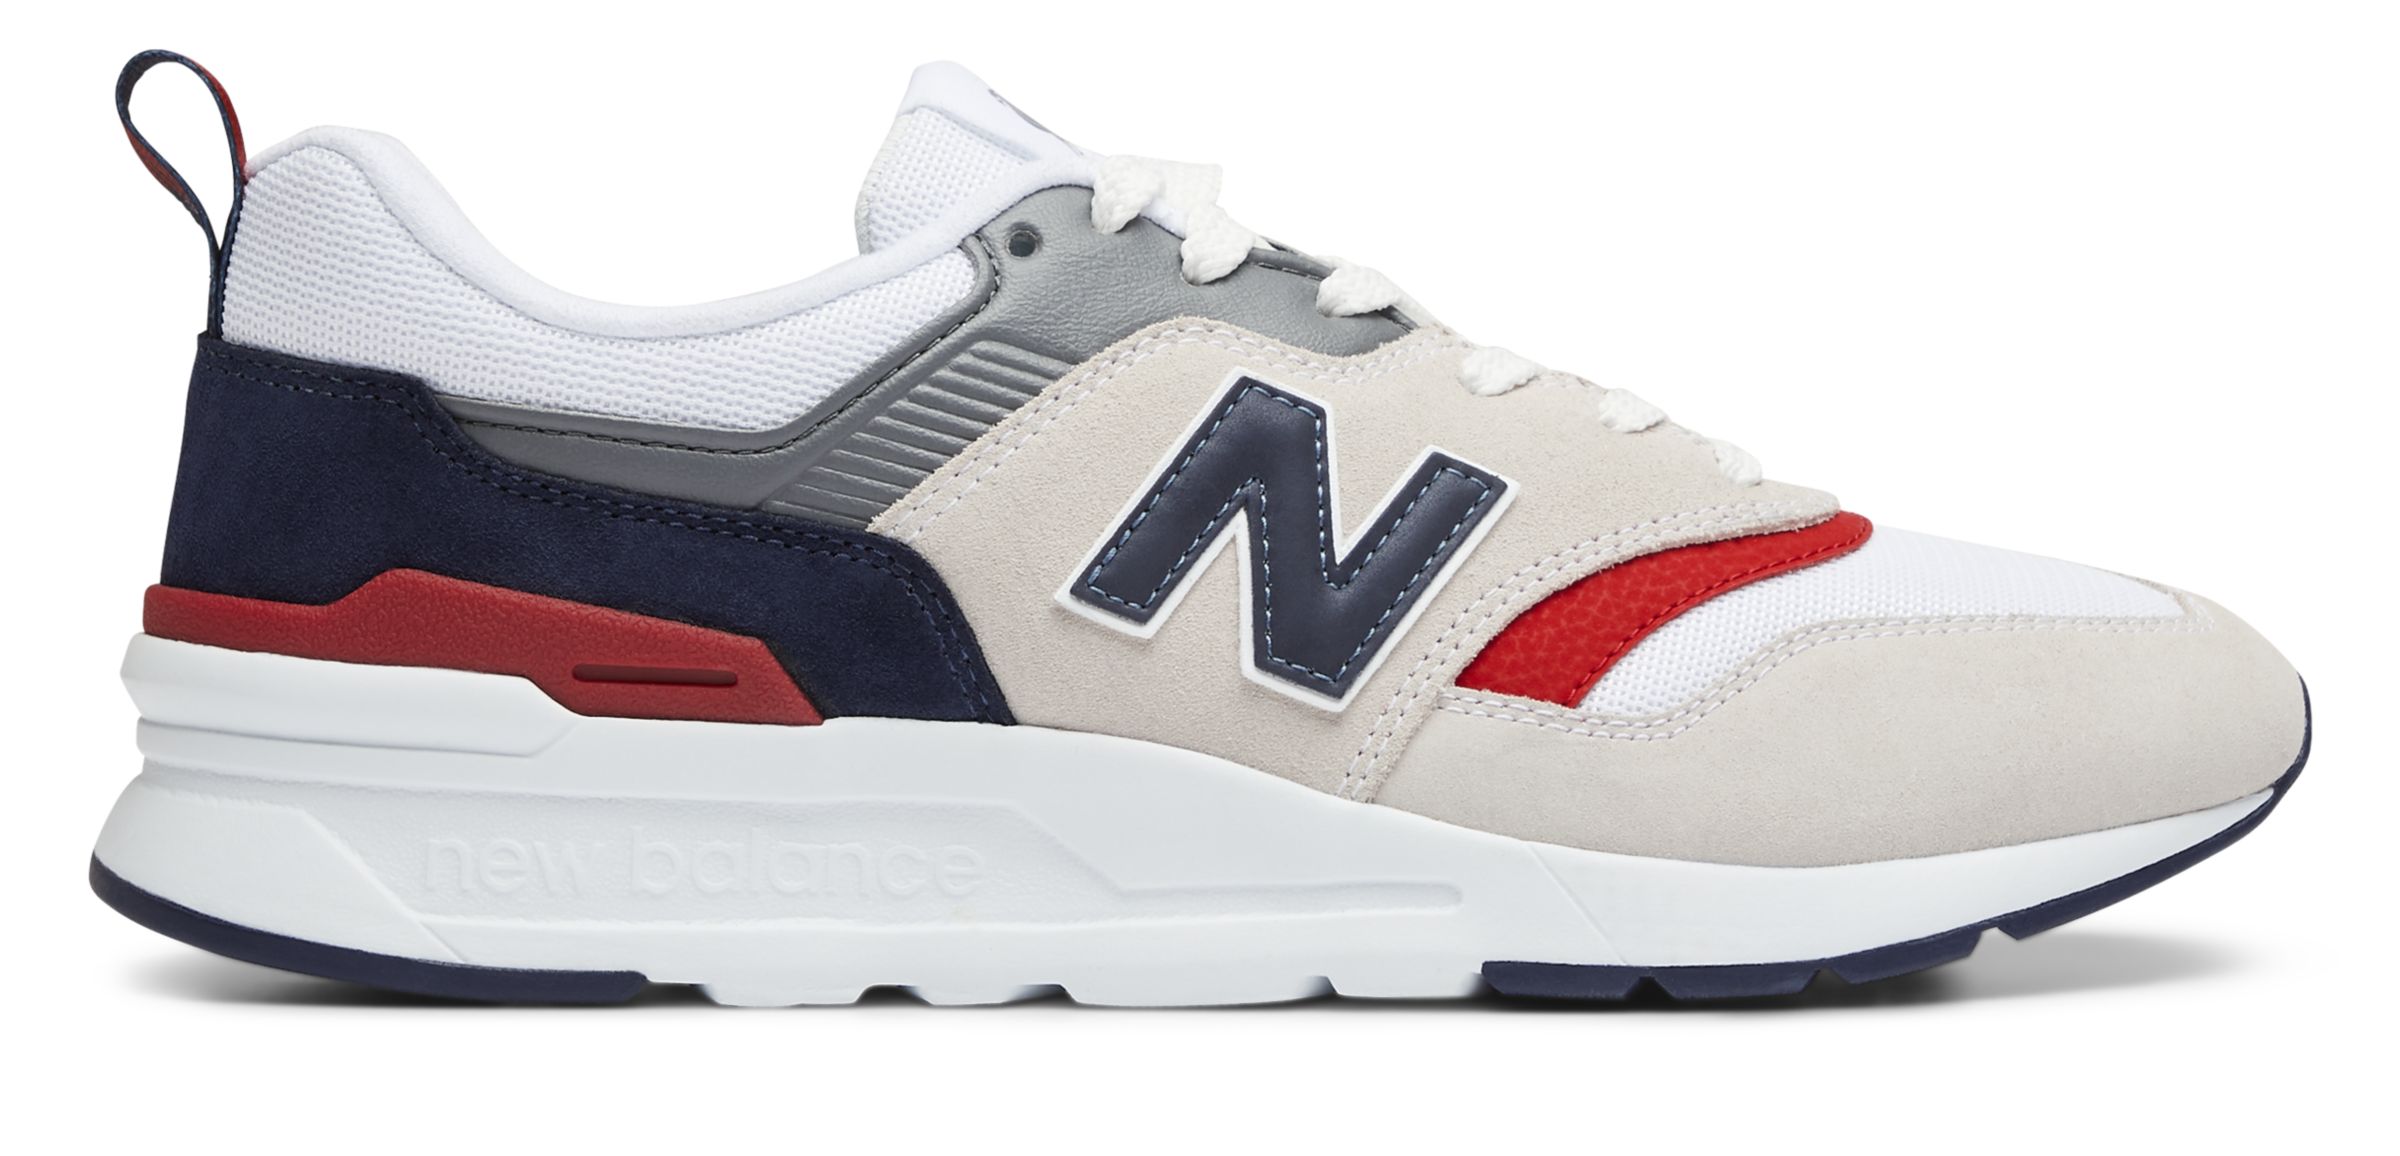 new balance sneakers 997h